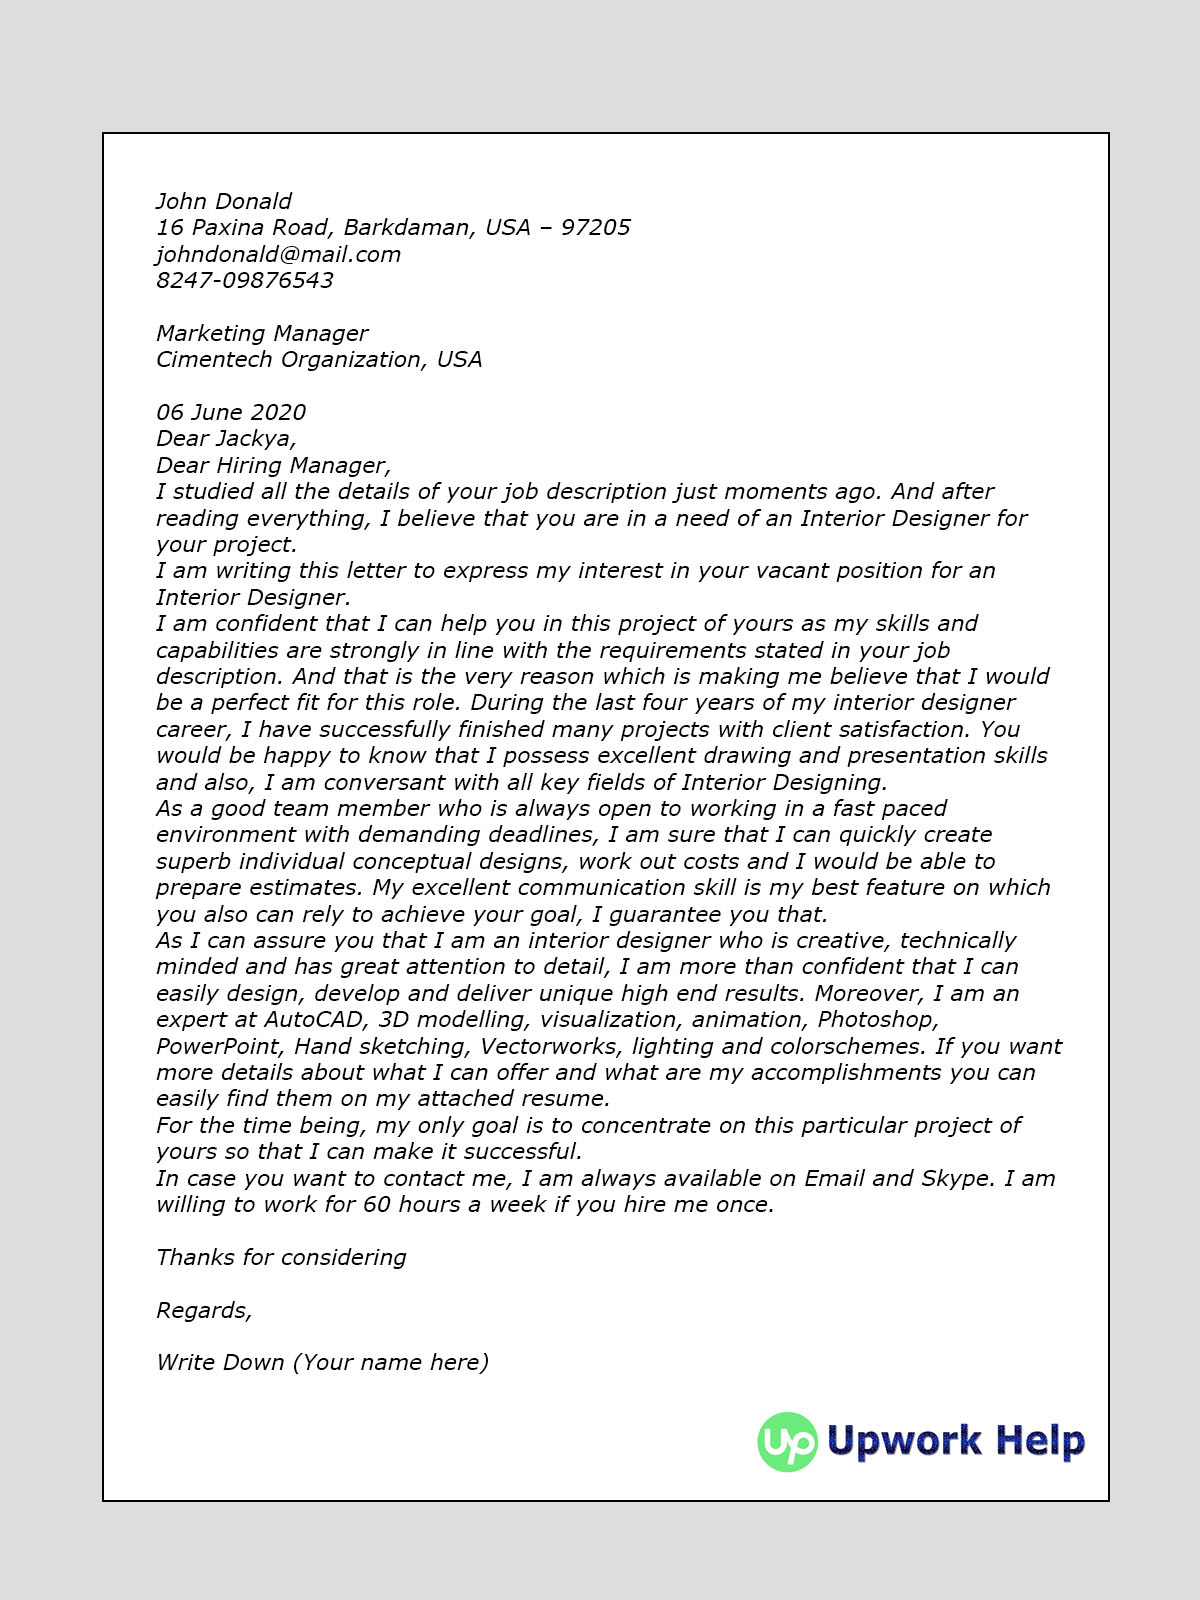 examples of cover letter for interior designer